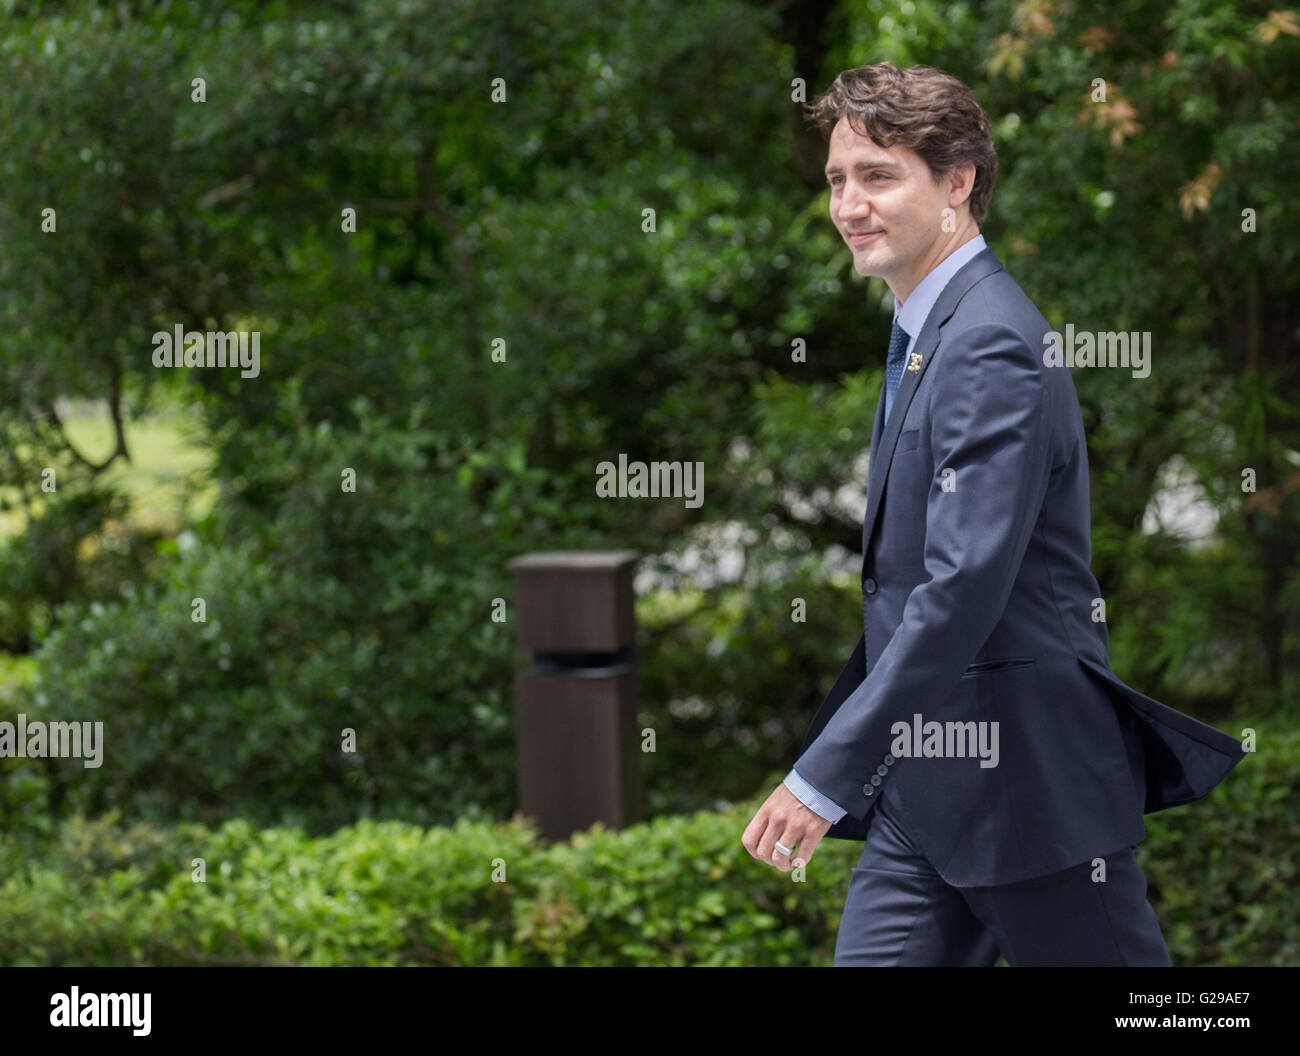 Ise-Shima, Japan. 26th May, 2016. Canadas Prime Minister Justin Trudeau arriving at the garden of the Ise shrine in Ise-Shima, Japan, 26 May 2016. The heads of government of the G7 state meet in Ise-Shima for a summit. PHOTO: MICHAEL KAPPELER/dpa/Alamy Live News Stock Photo